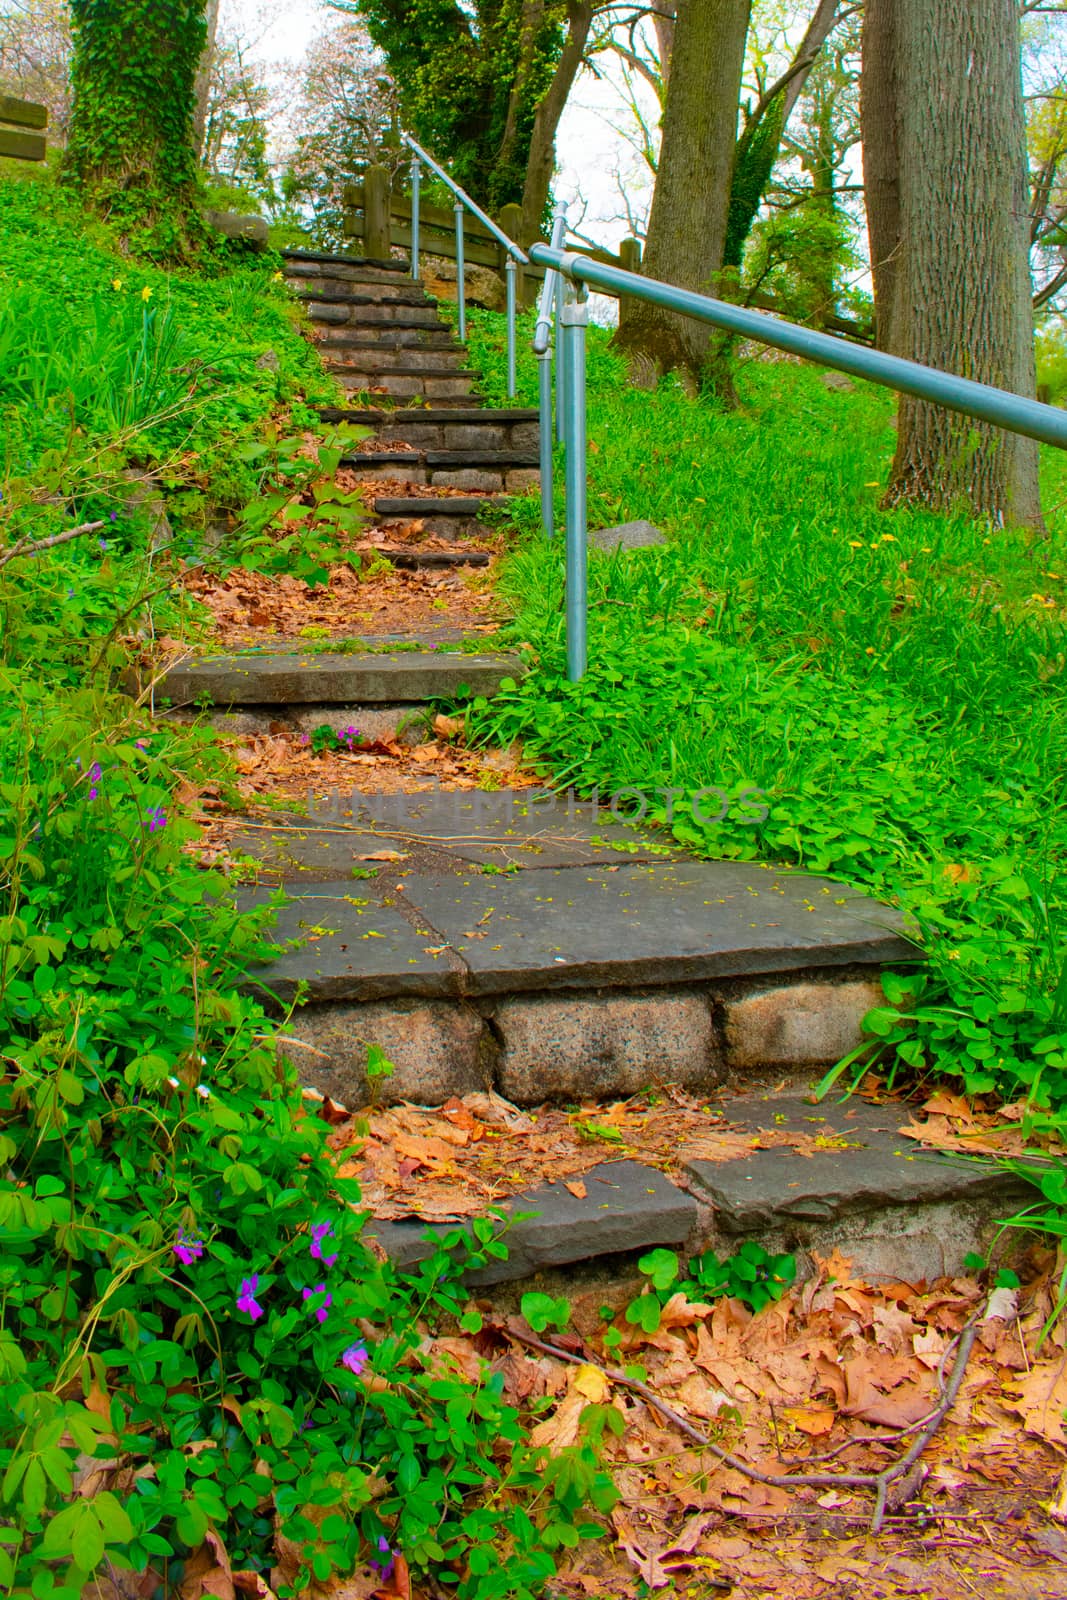 A Stone Path in an Overgrown Park Full of Greenery With a Metal Fence on the Side